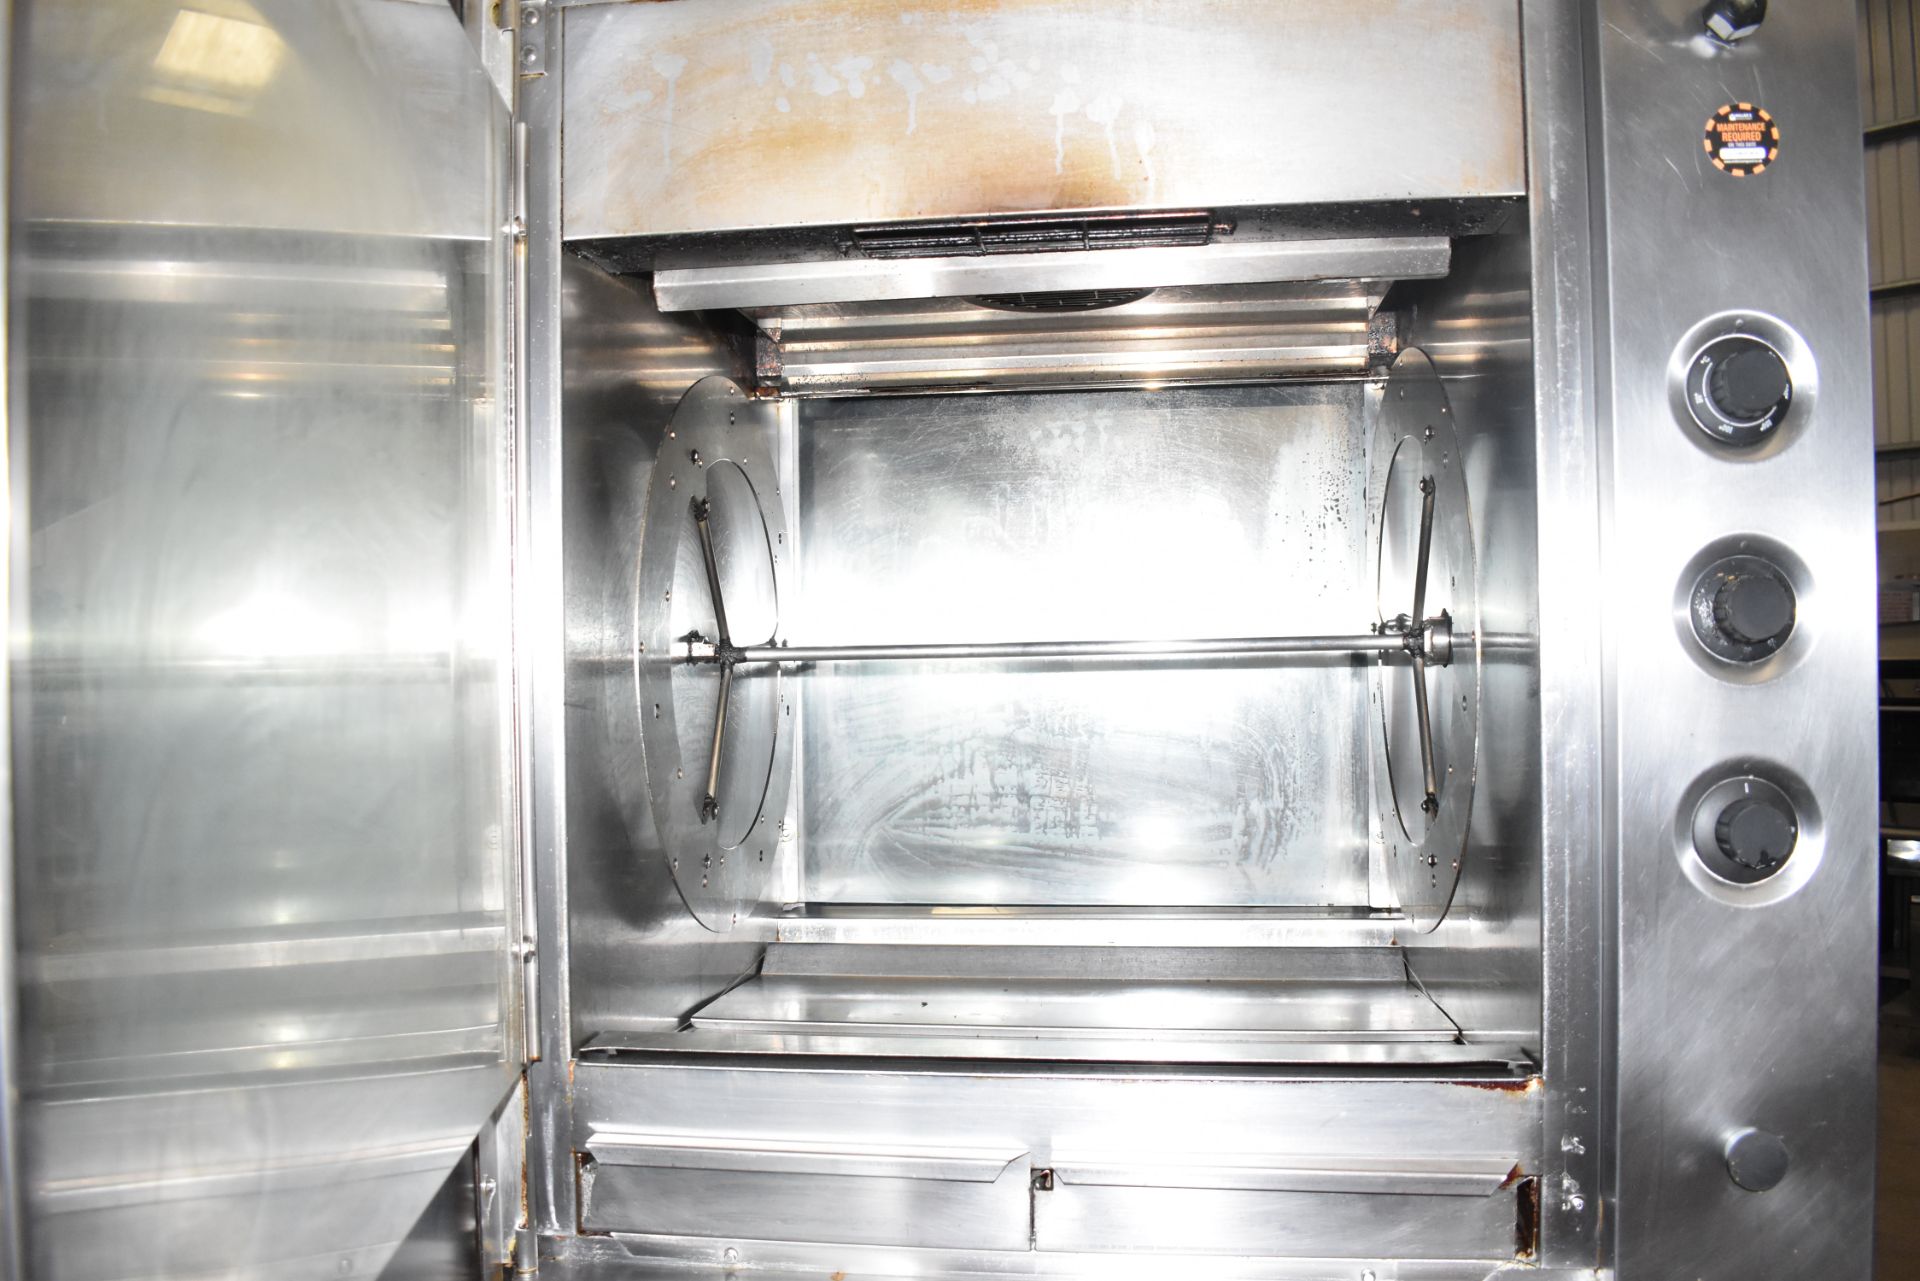 1 x Fri-Jado TDR8+8 Manual Chicken Rotisserie Double Oven - Holds 80 Chickens - CL453 - 3 Phase - Image 10 of 12